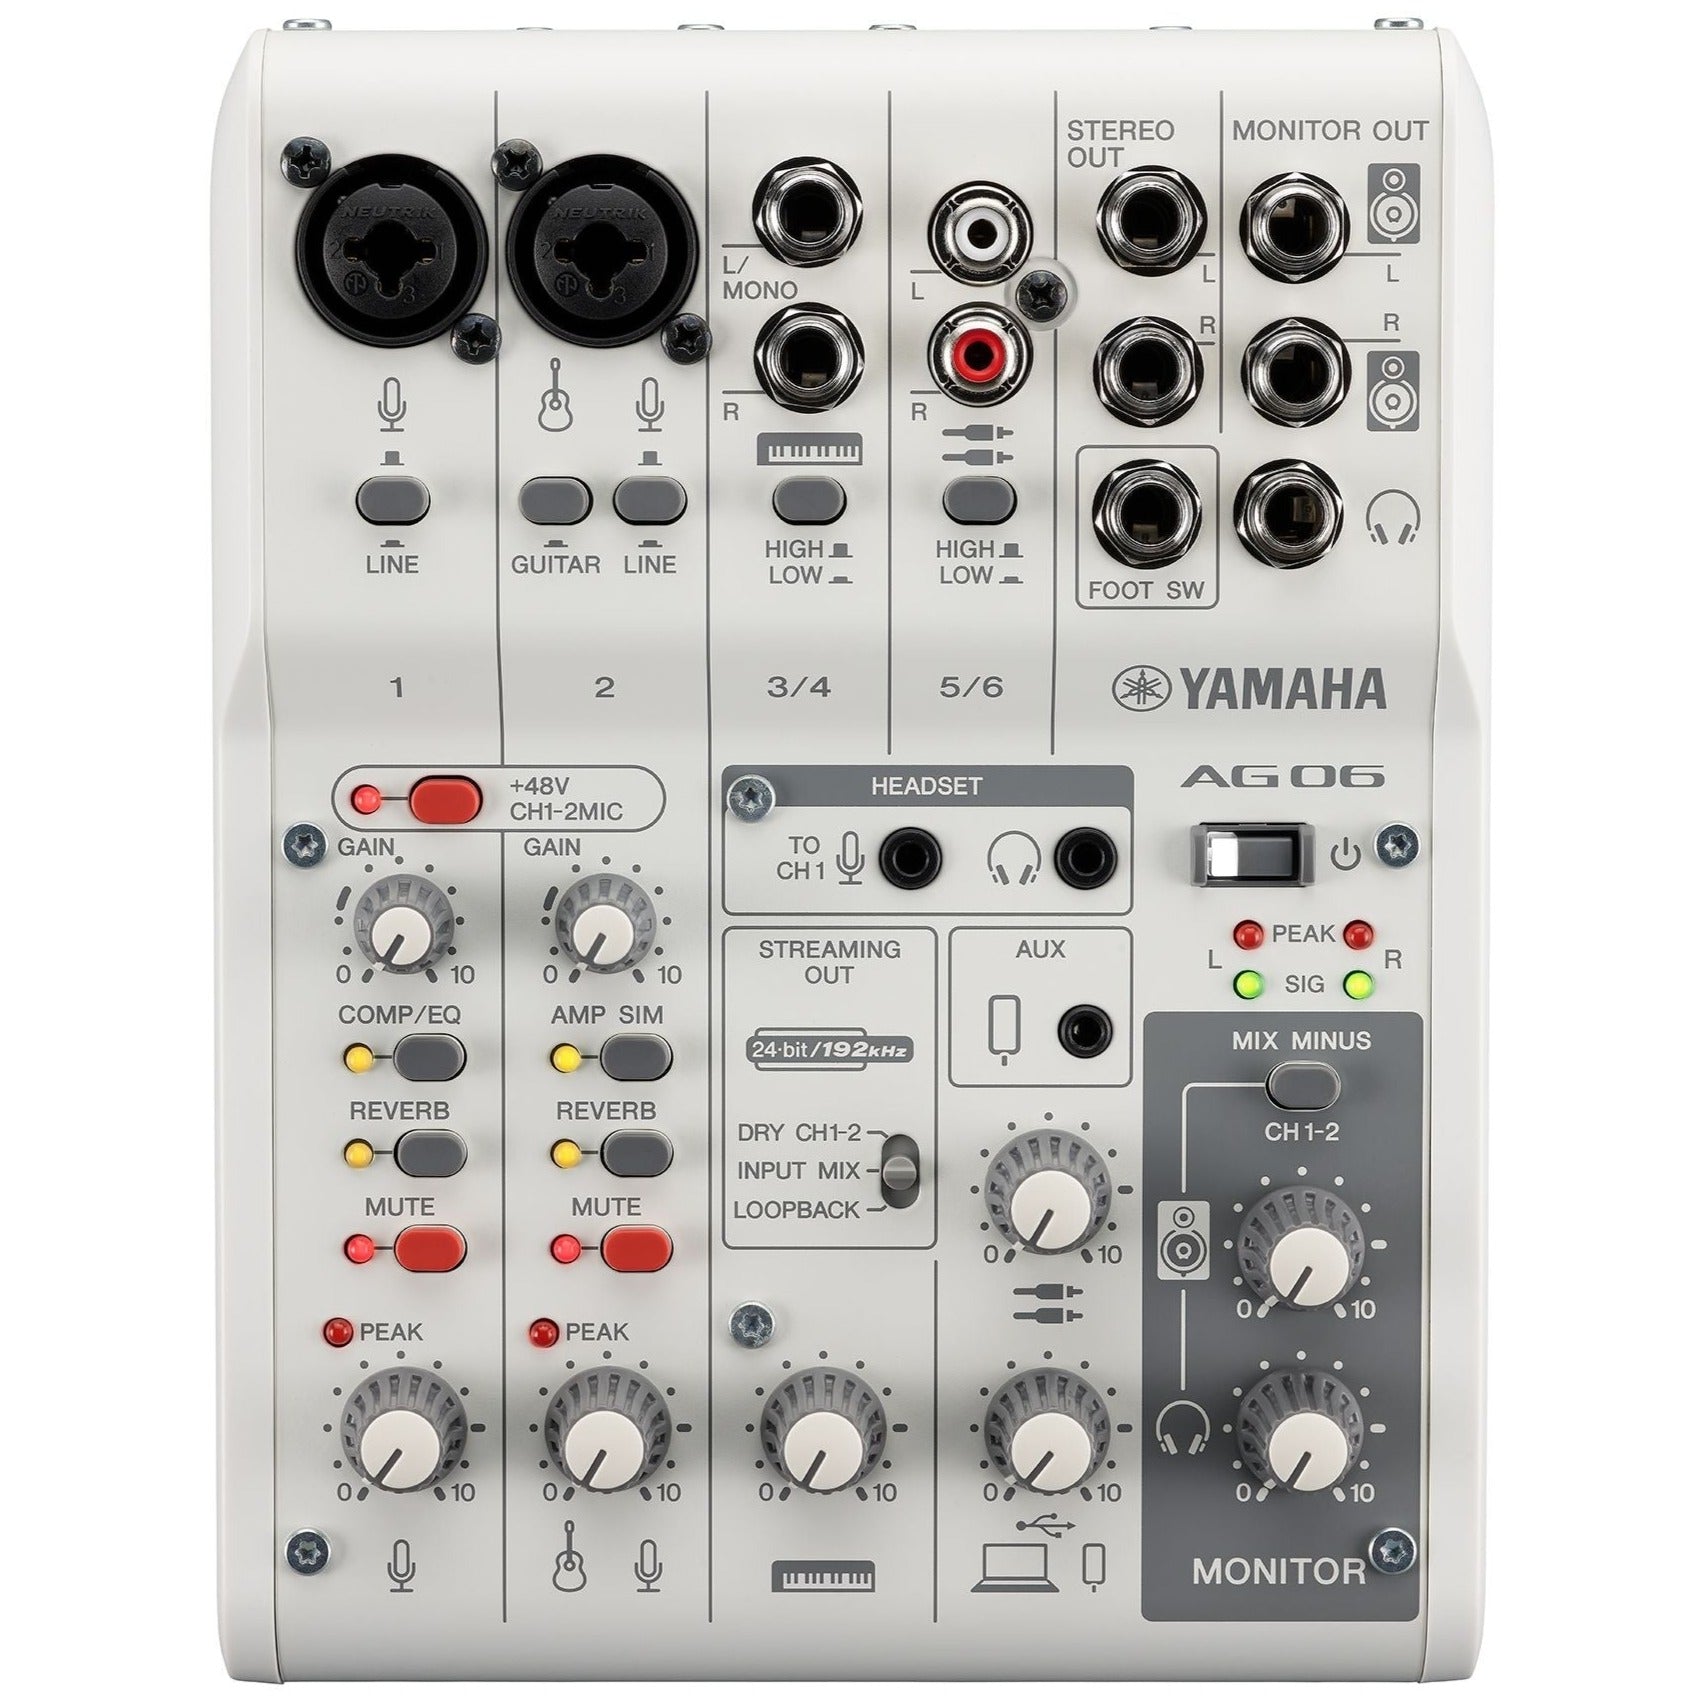 pude Mount Bank indkomst Yamaha AG06MK2W 6-Channel Mixer/USB Audio Interface for iOS/MAC/PC, Wh –  Easy Music Center